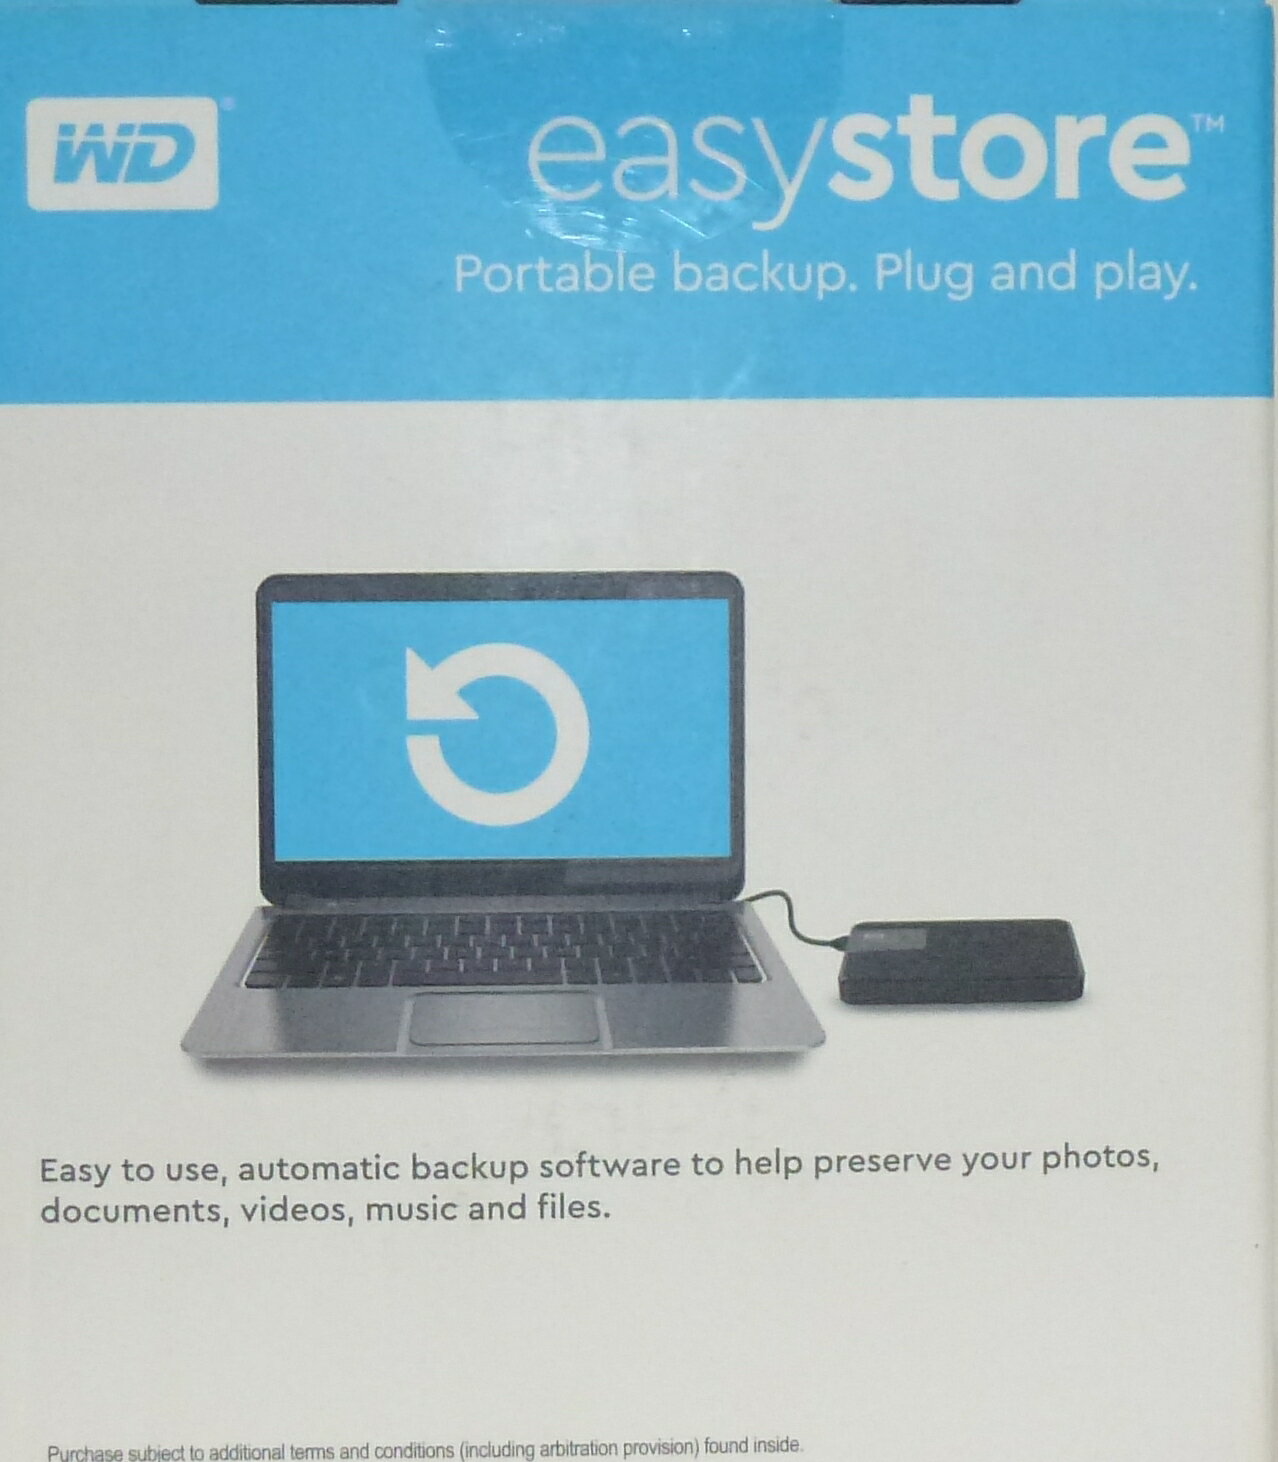 wd easystore software